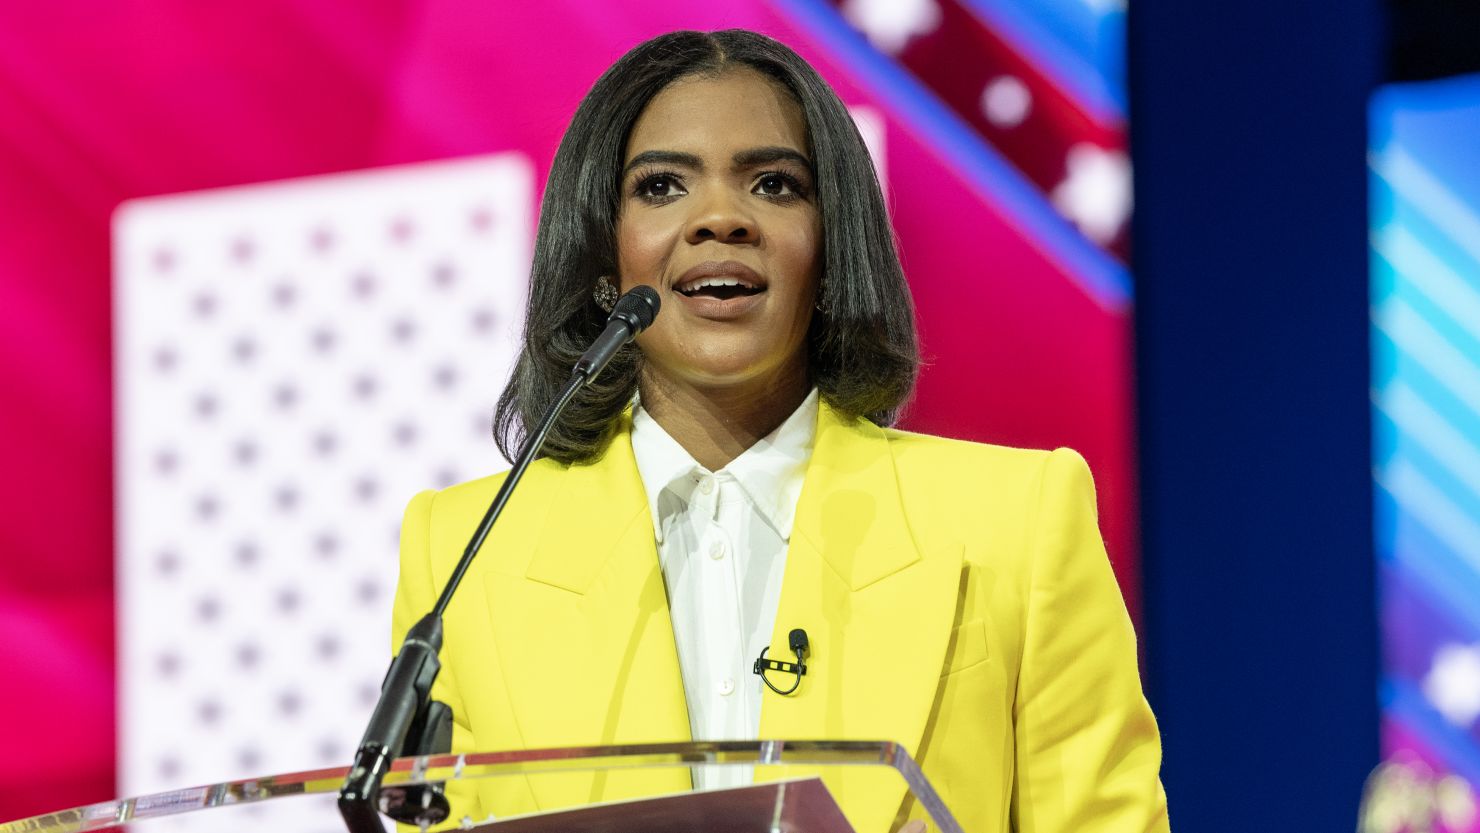 Candace Owens speaks on the 1st day of CPAC on March 2, 2023. Owens and the conservative media outlet The Daily Wire have split.